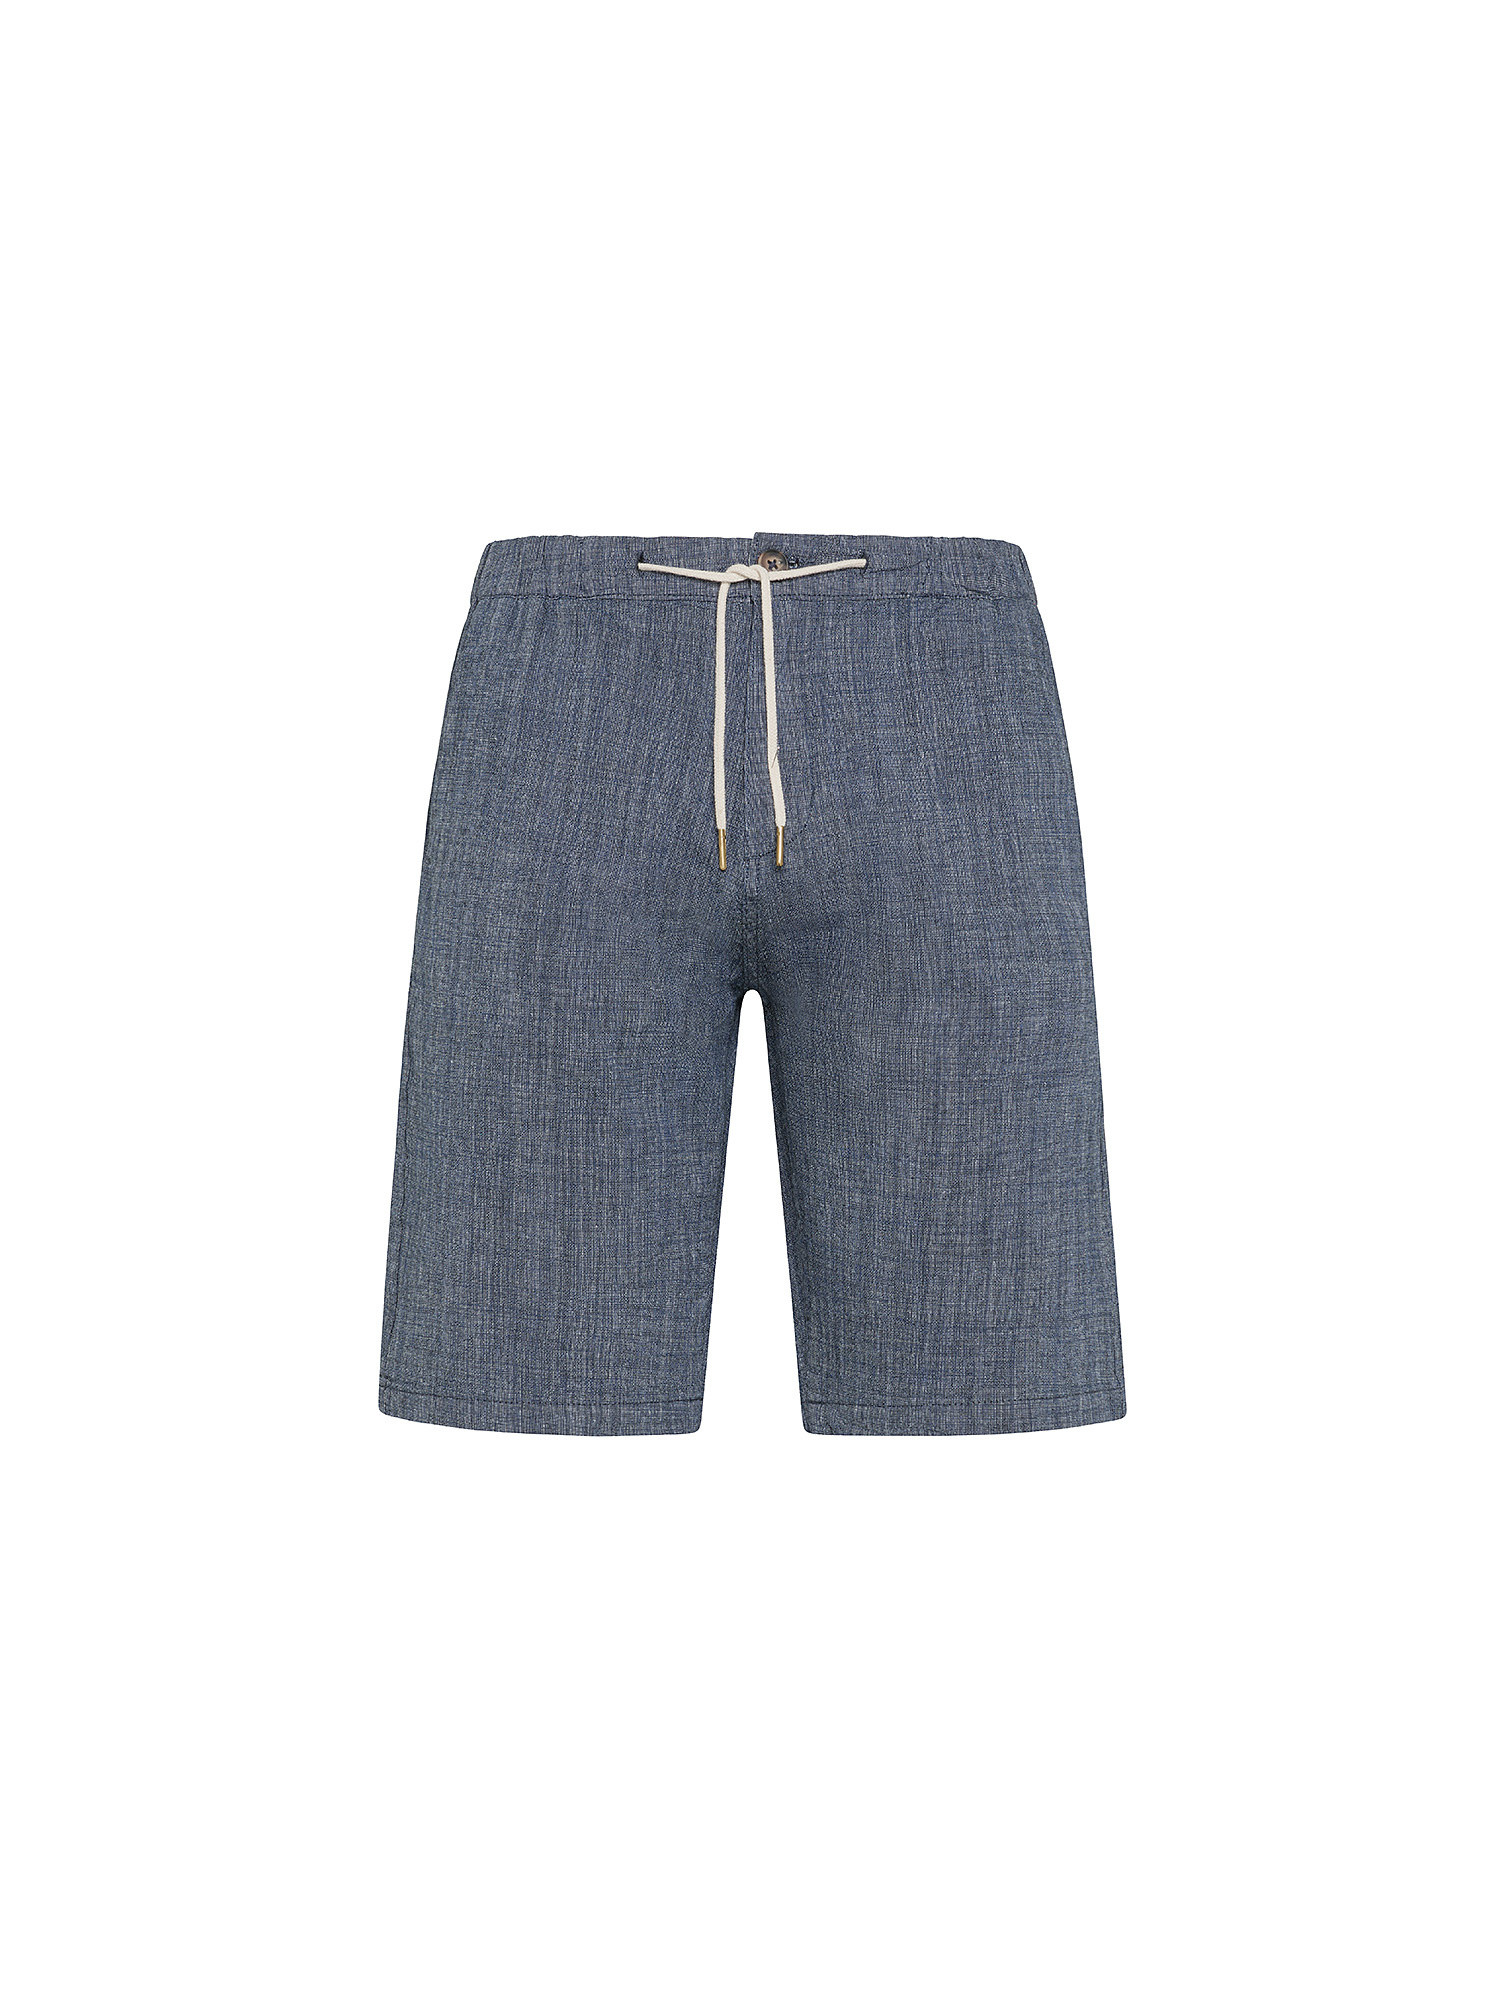 JCT - Chino bermuda in pure cotton with laces, Dark Blue, large image number 0